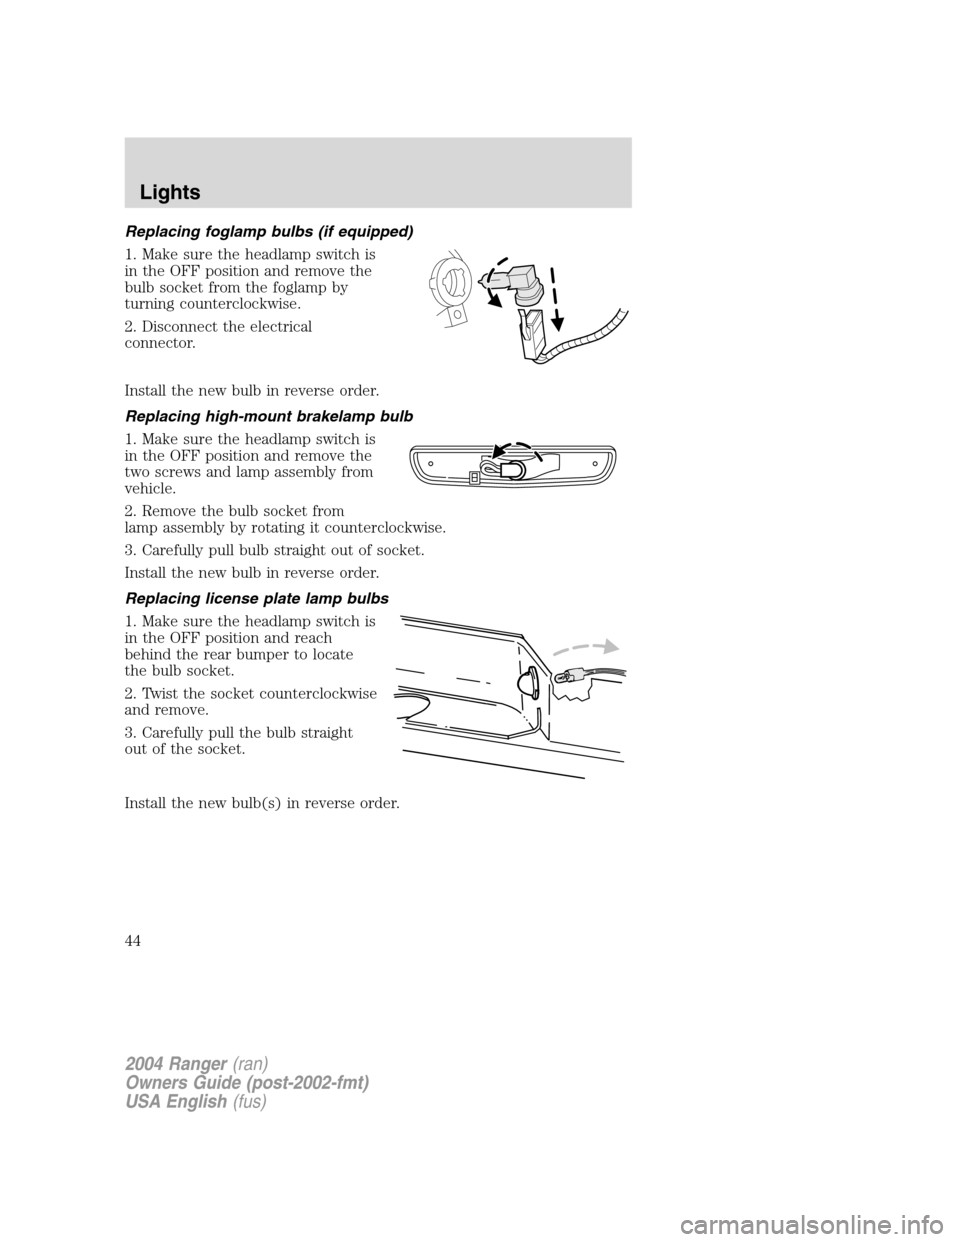 FORD RANGER 2004 2.G Owners Manual Replacing foglamp bulbs (if equipped)
1. Make sure the headlamp switch is
in the OFF position and remove the
bulb socket from the foglamp by
turning counterclockwise.
2. Disconnect the electrical
conn